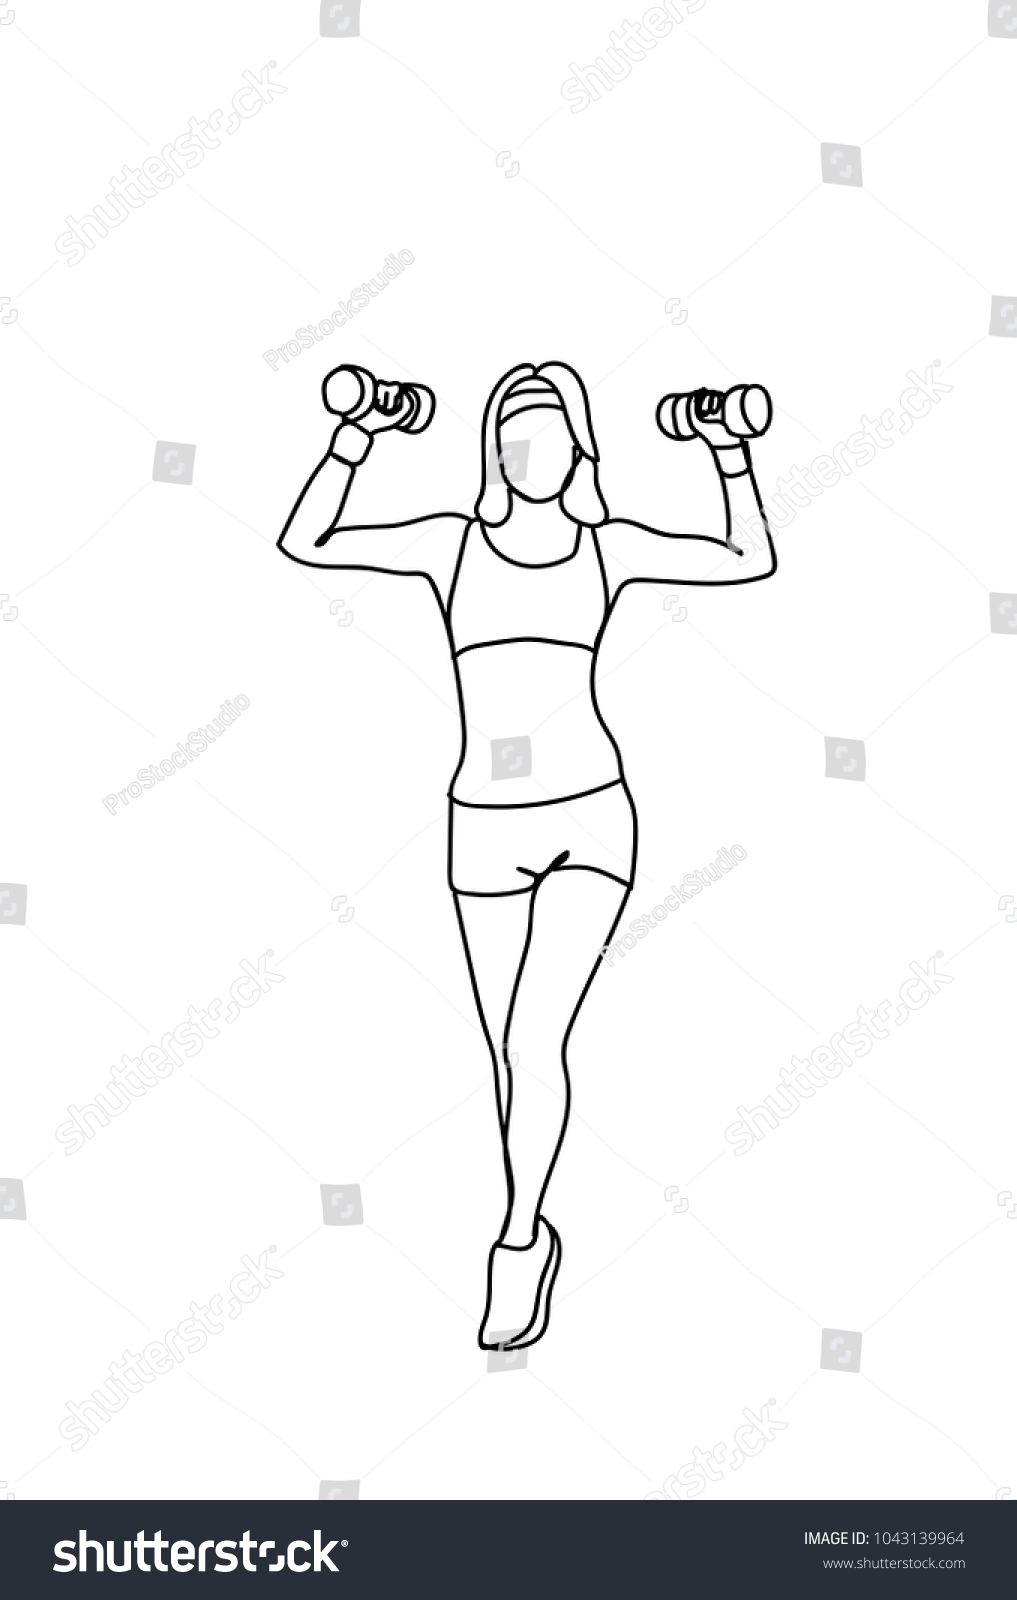 Silhouette Woman Training Weights Workout Exercise Stock Vector ...